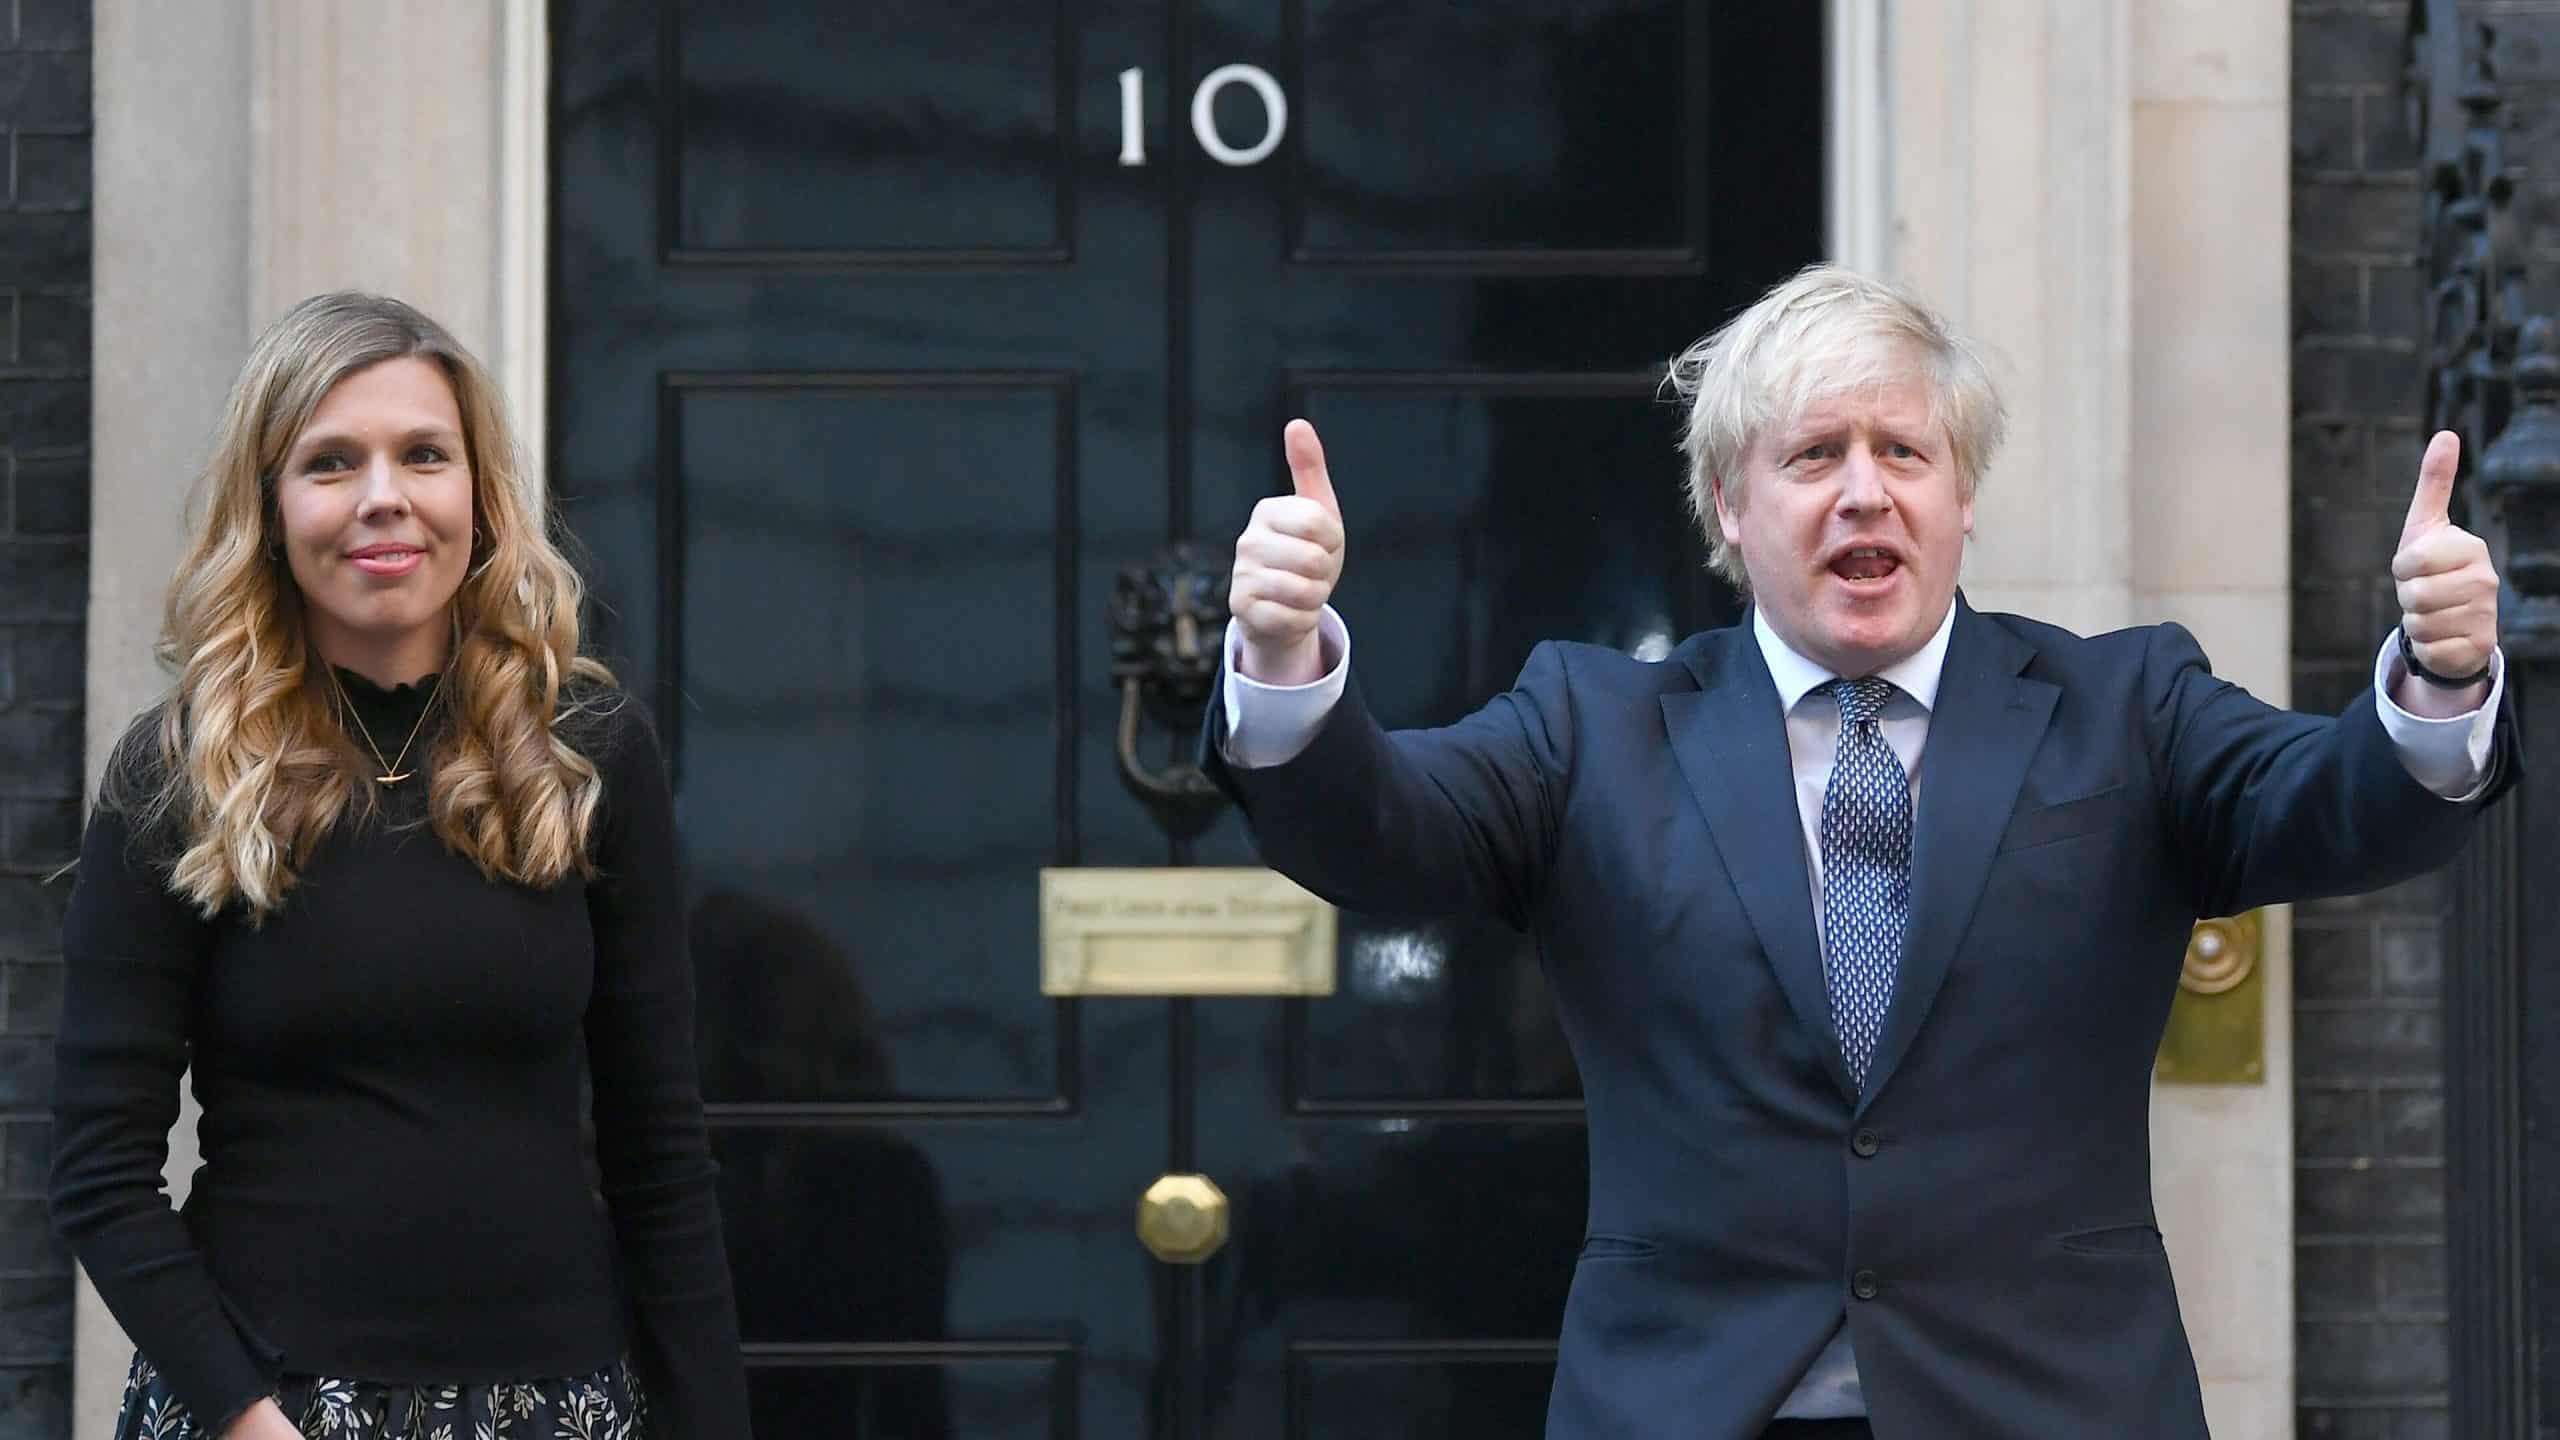 Johnson is a cosplay Prime Minister – Incapable of work and unable to take responsibility